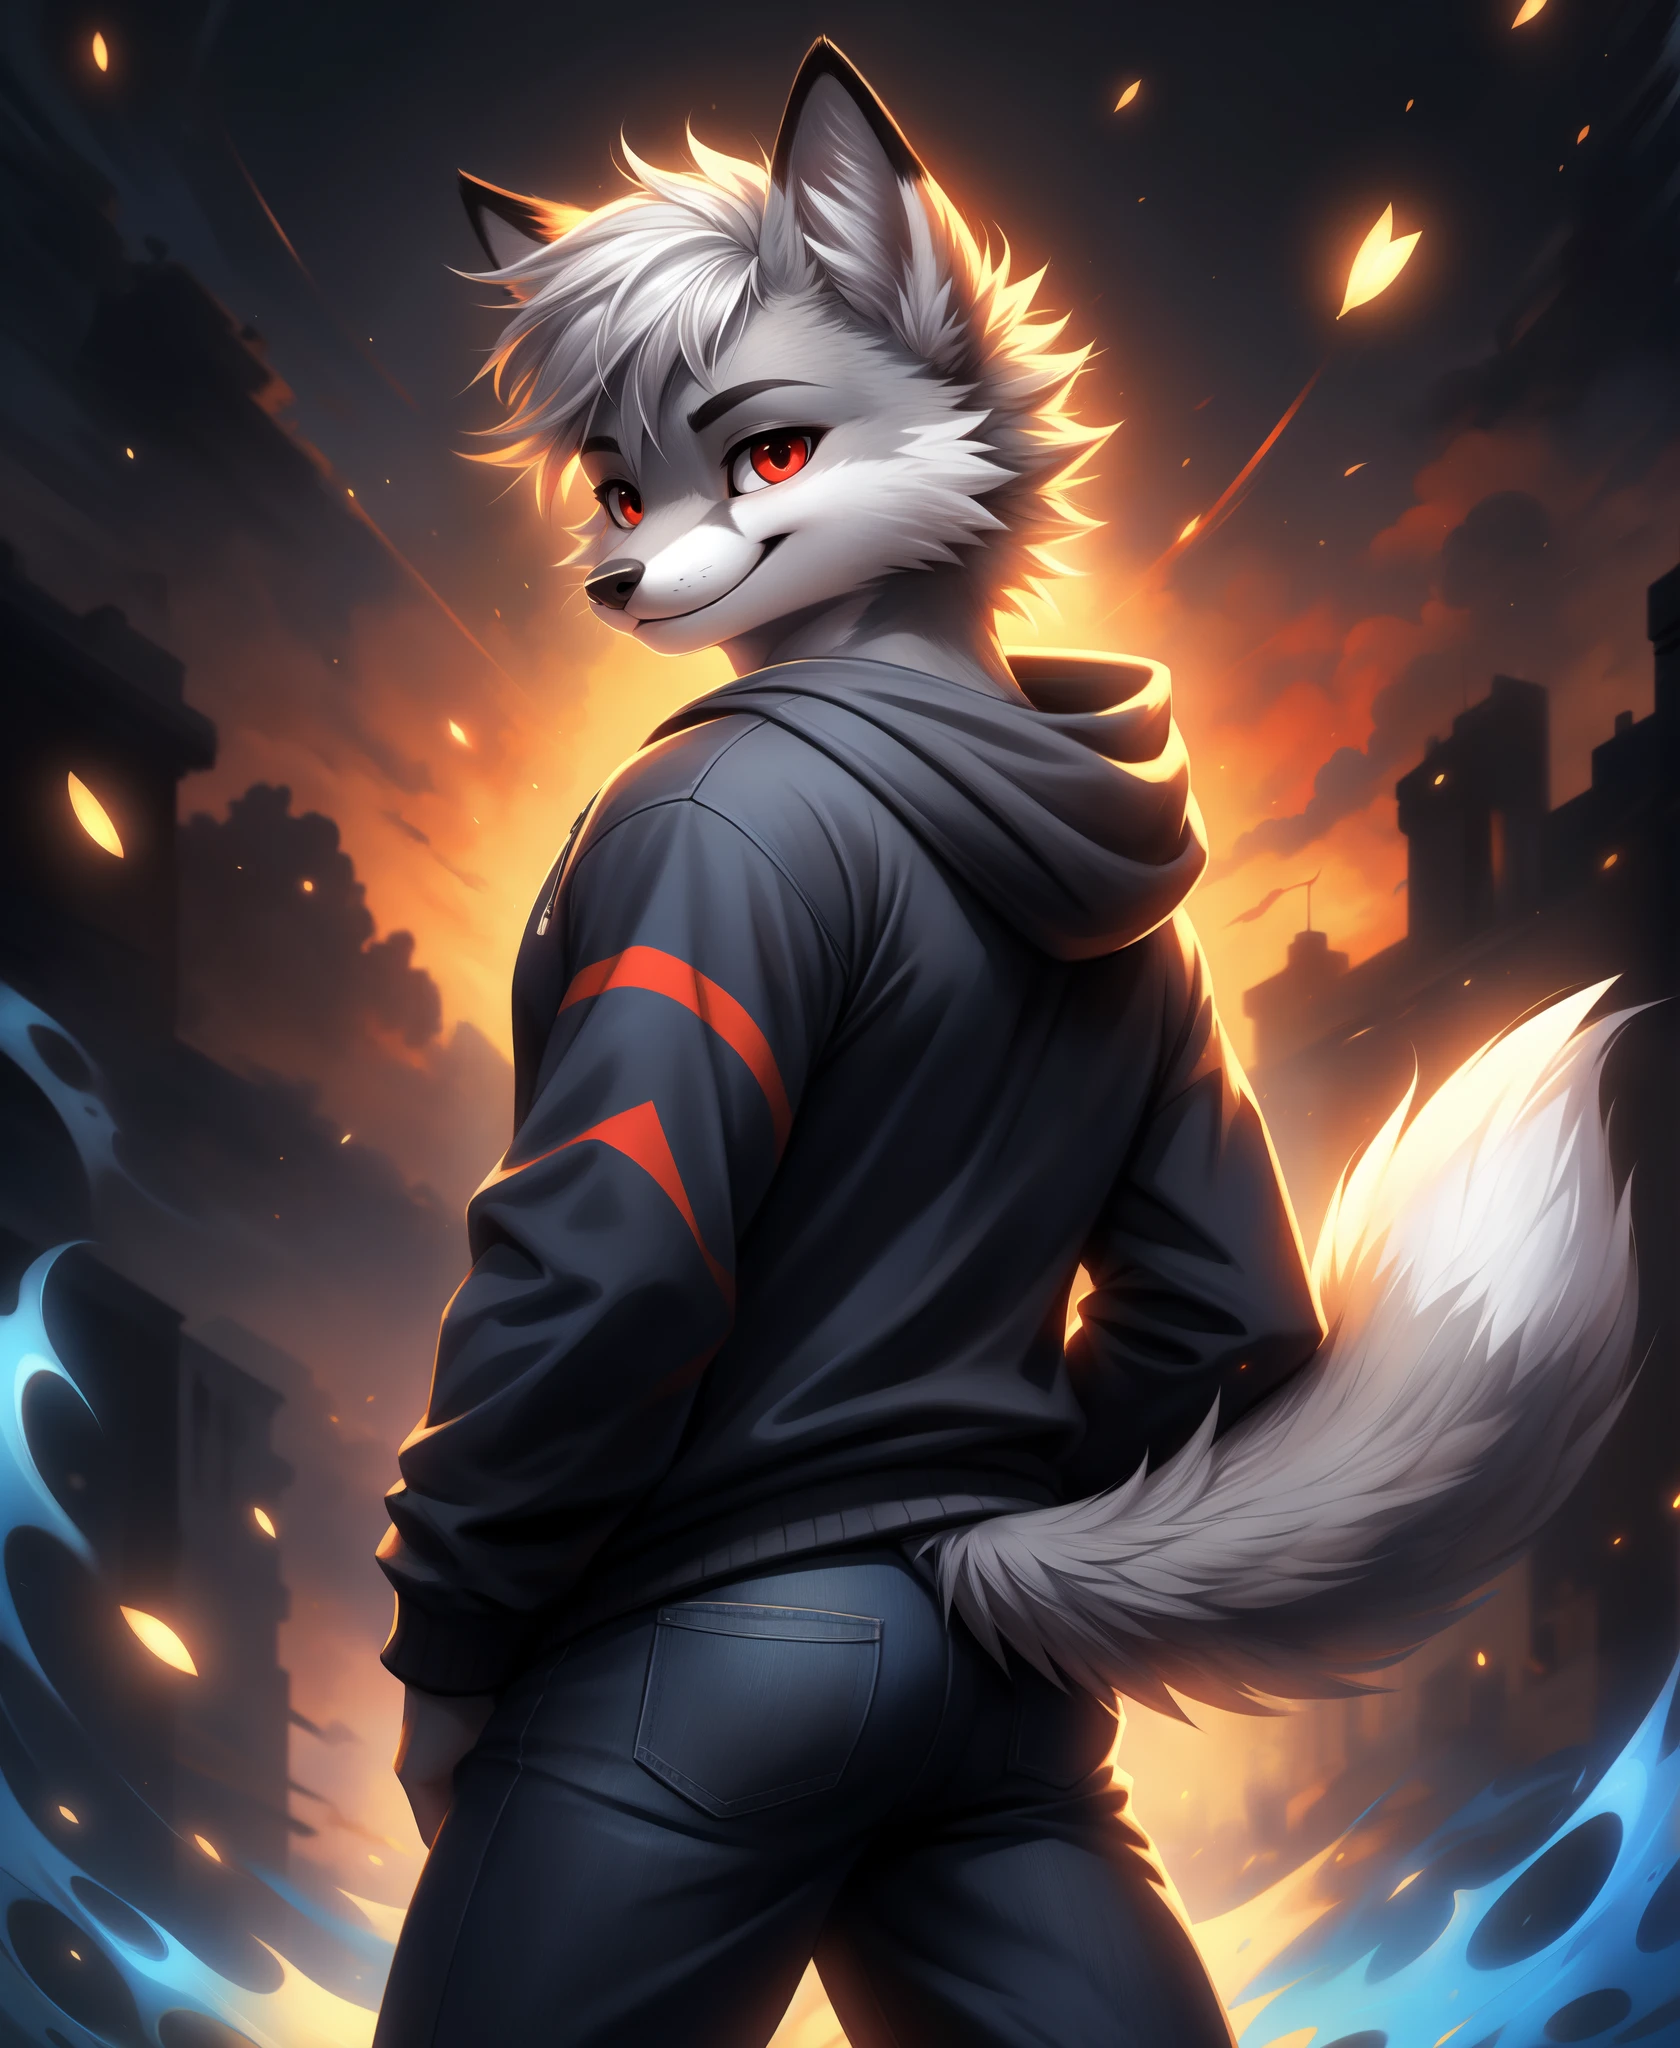 (anthro fox, muscular, wavy hairs}:1.2),
smiling
(good lights, good colors, good composition, monocolor,:1.2)
masterpiece, aestheticcartoon,
bestart, cartoon,
(cute:0.1),
morning, rim lights
bestart, masterpiece, extremely detailed furs, 8k,  soft fur, perfect composition, detailed shading, dynamic pattern with accents, detailed style, soft, vibrant colors,
good face, furry, gorgeous eyes, portrait,
long fluffy tail, smiling, (cute:0.1),
back view, looking back,
,
bandana,
,
,
,
glowing patterns,
(white and gray furs, white and gray hairs:1.3) with complex patterns,
,
slightly muscular,
(hoodie:1.2),
sexy pose,
dynamic scene,
dynamic abstract background,
teenager, musculegs,
blue jean,
(:1.2),
(monocolor red, red eyes:1.2),
BREAK,
playing football,